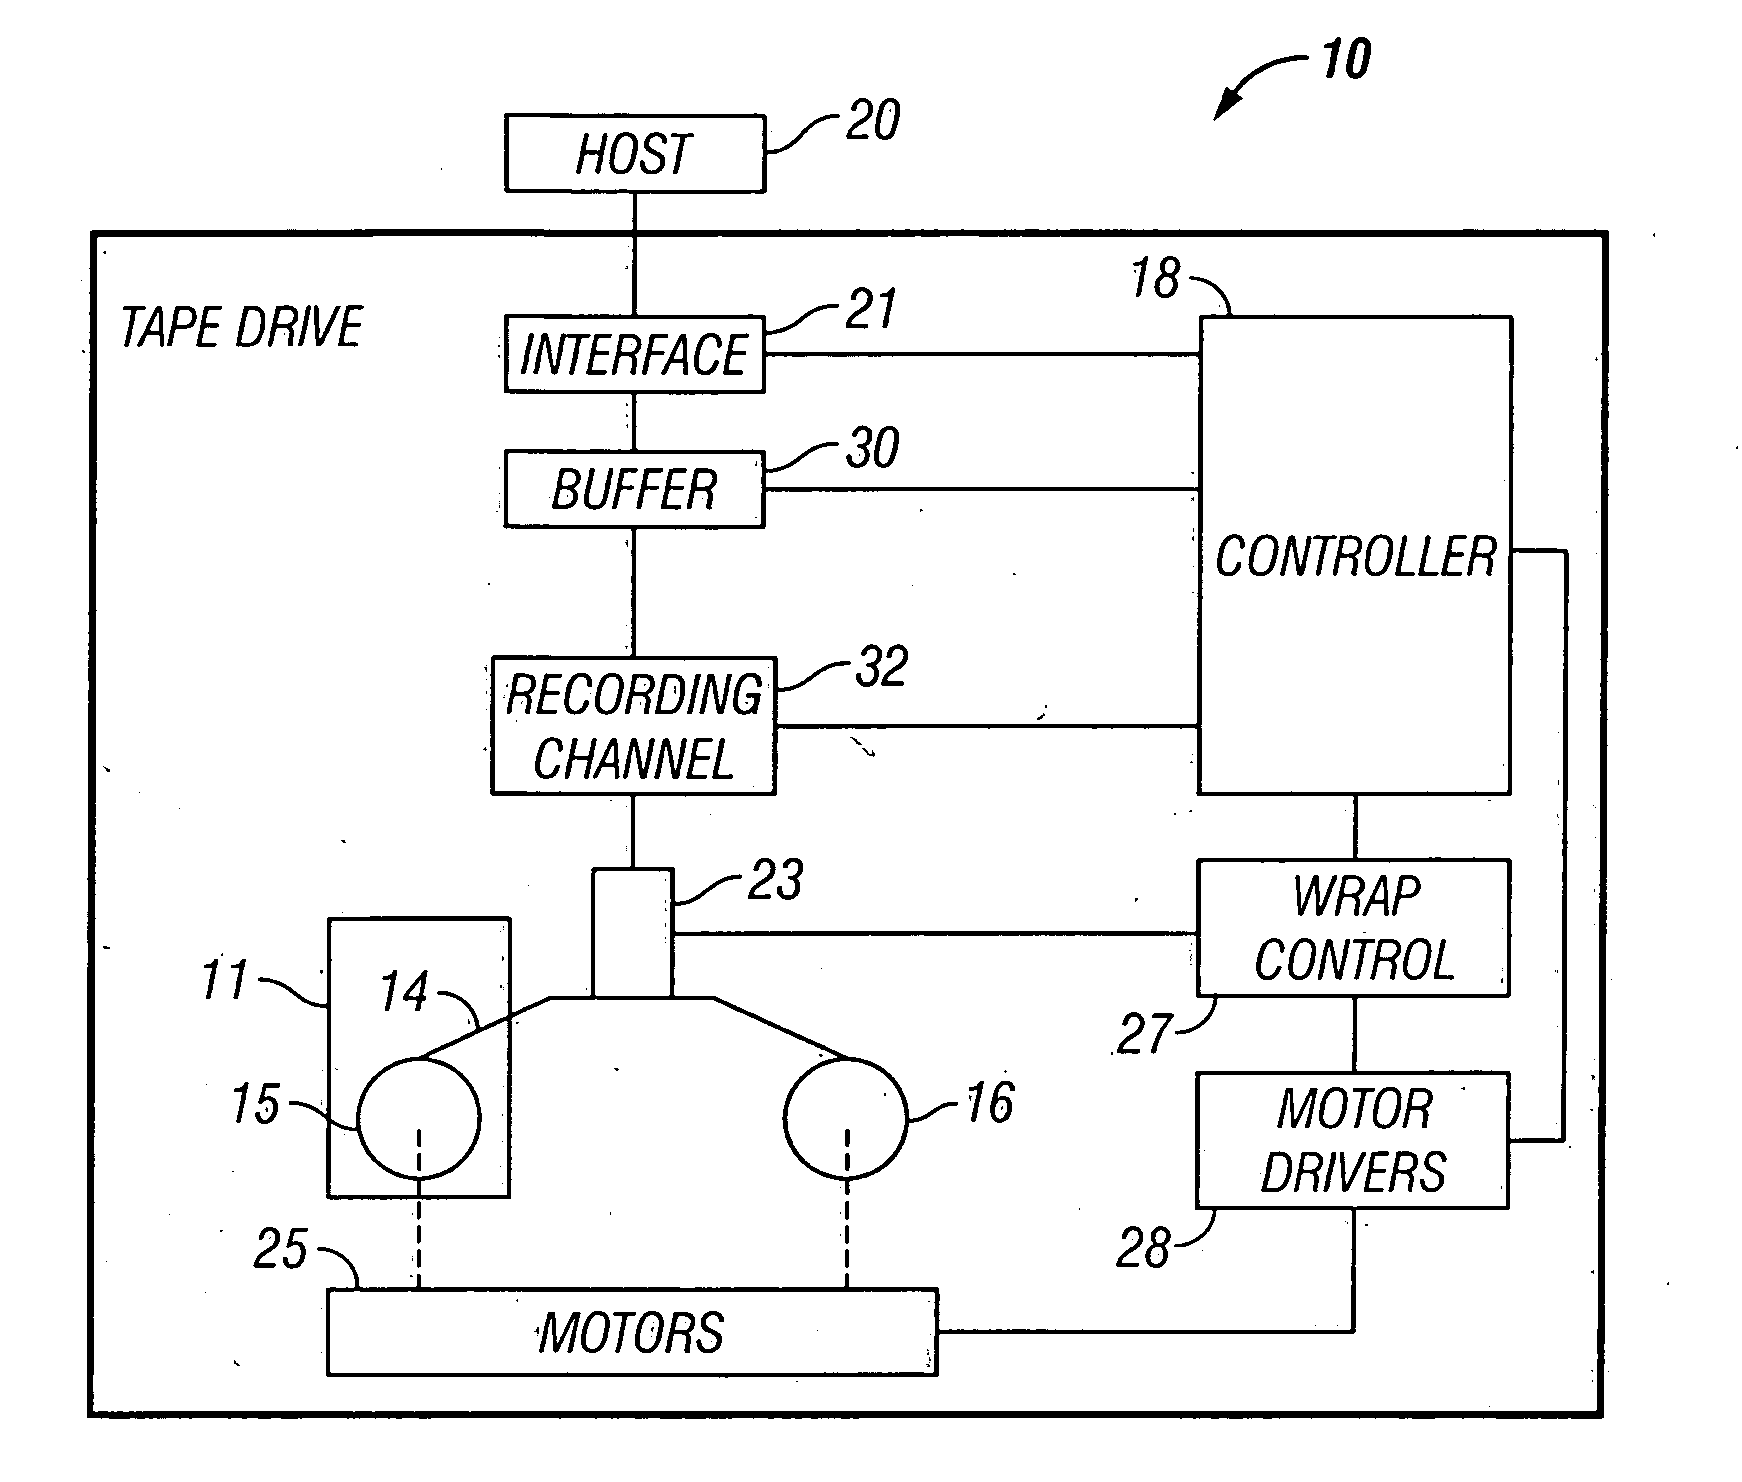 Forced backhitch for speed matching in a multi-speed tape drive